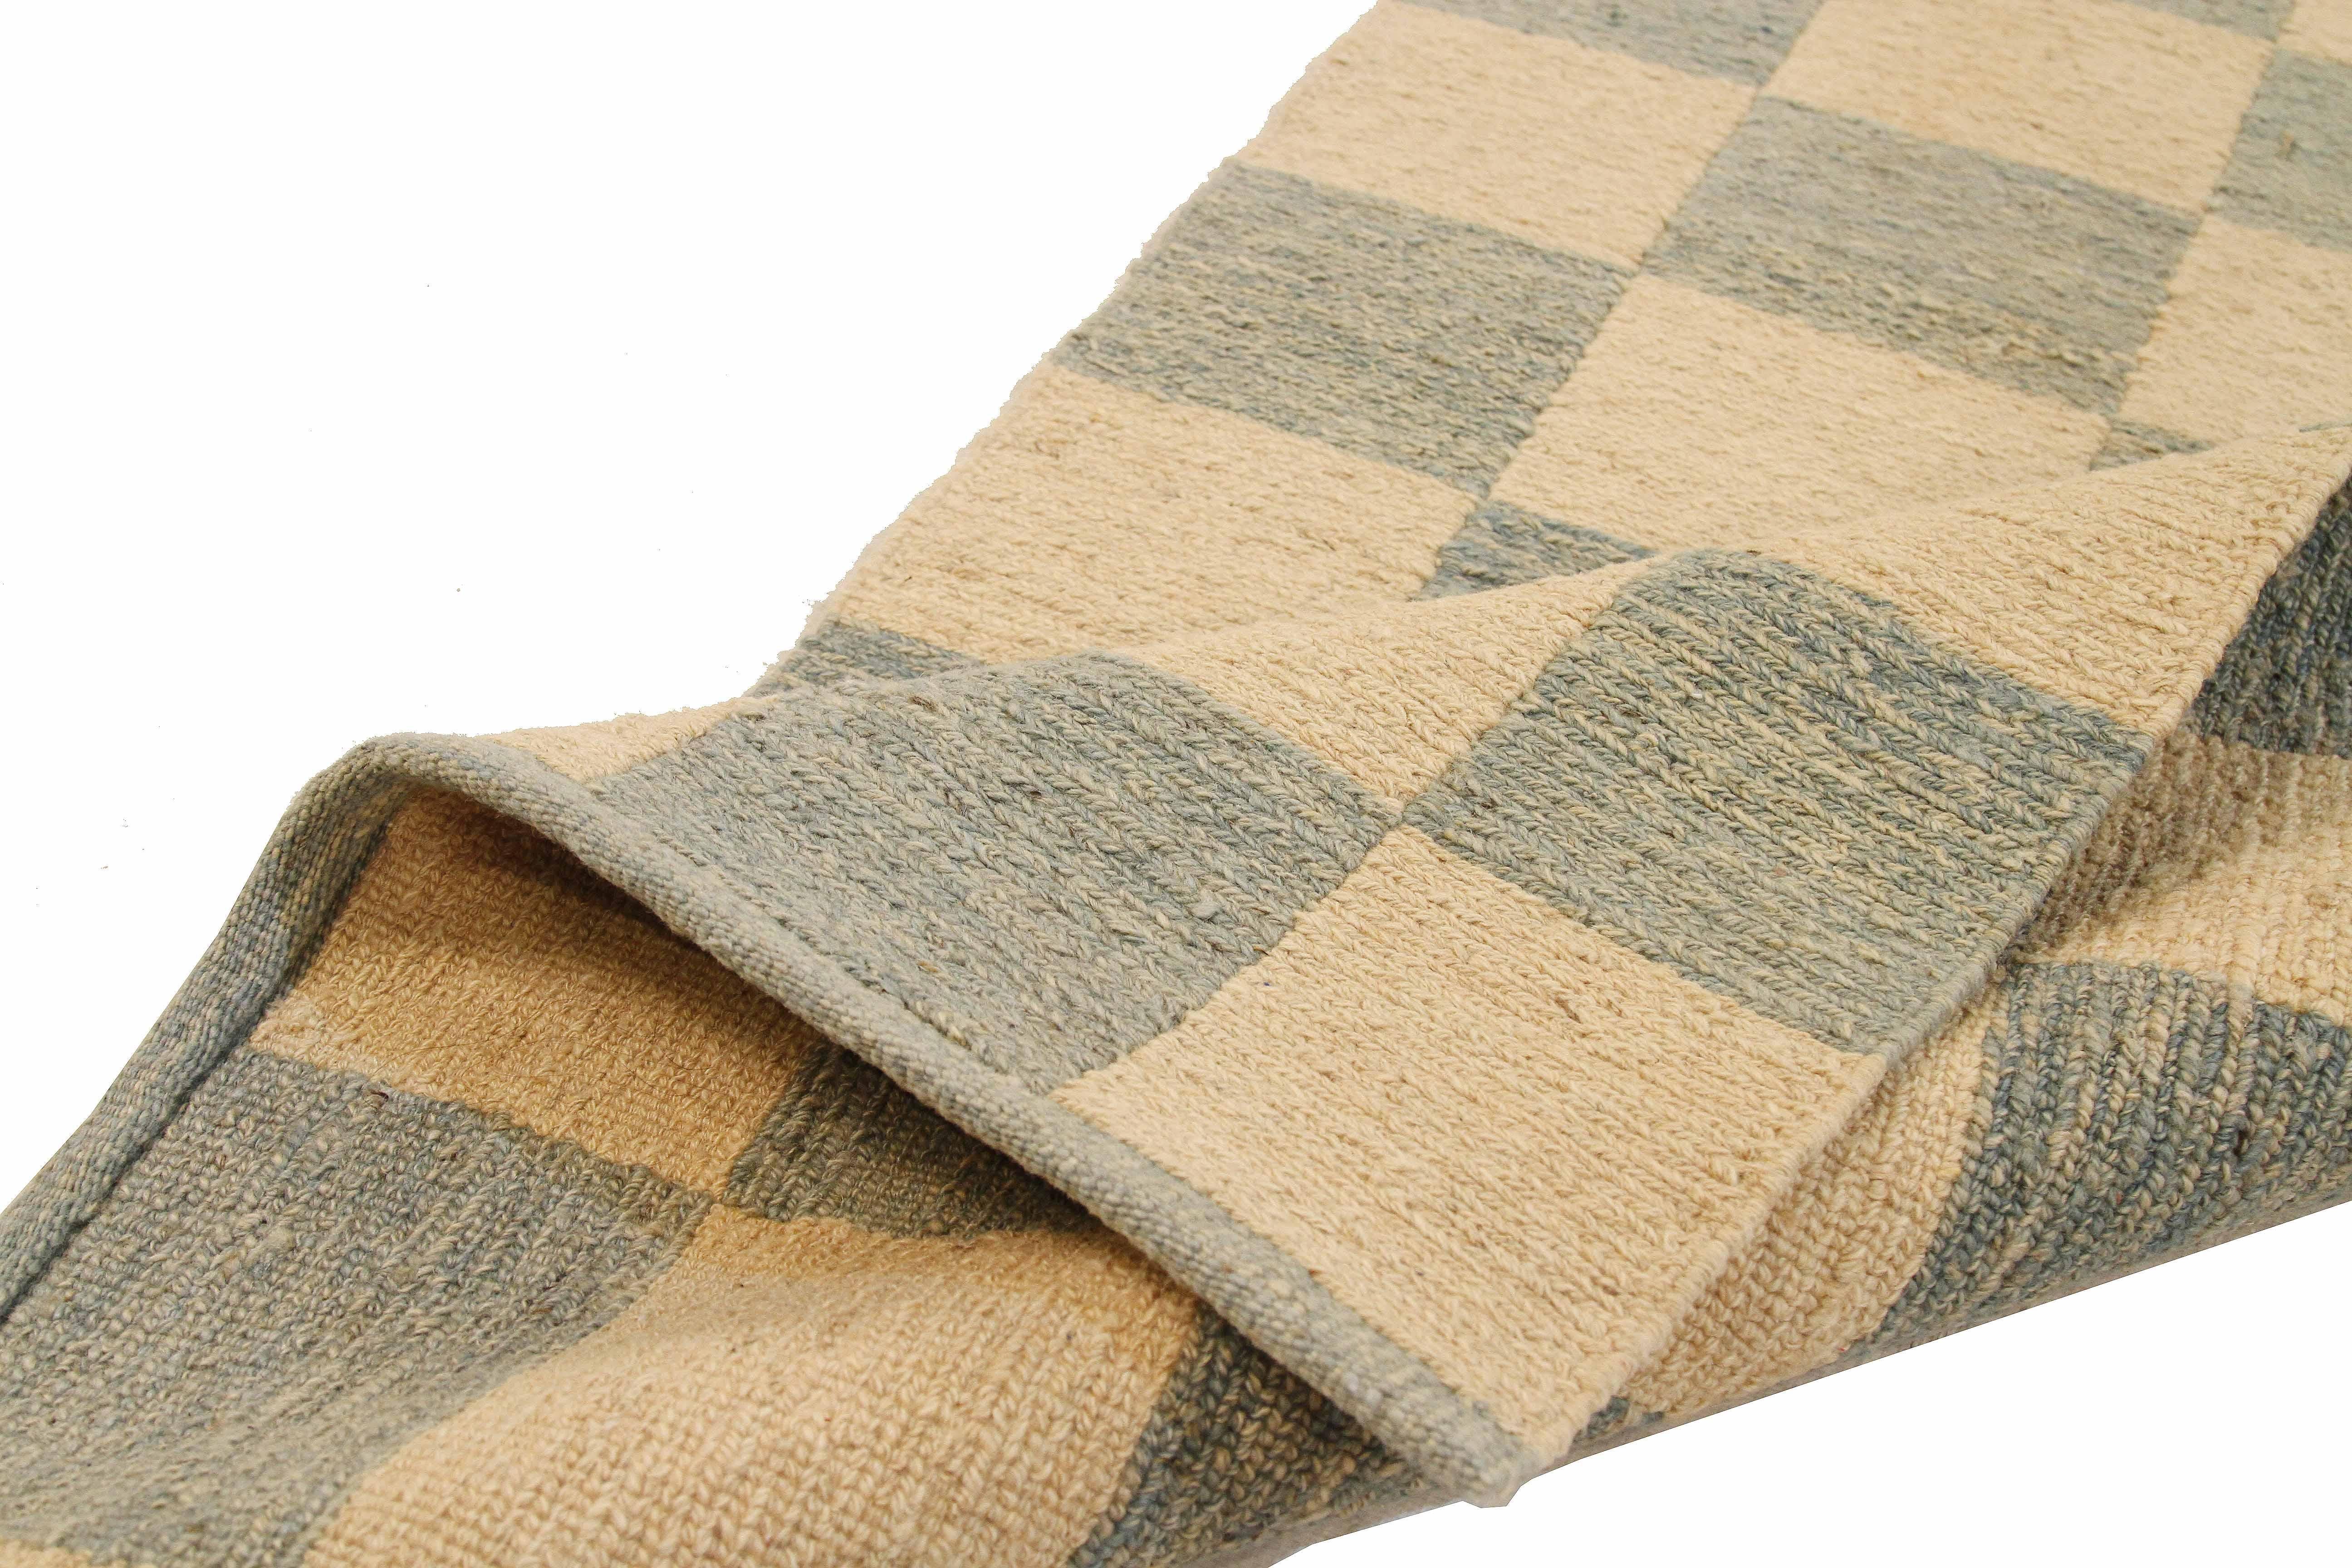 Turkish rug handwoven from the finest sheep’s wool and colored with all-natural vegetable dyes that are safe for humans and pets. It’s a traditional Kilim flat-weave design featuring green tile patterns on a plush ivory field. It’s a stunning piece